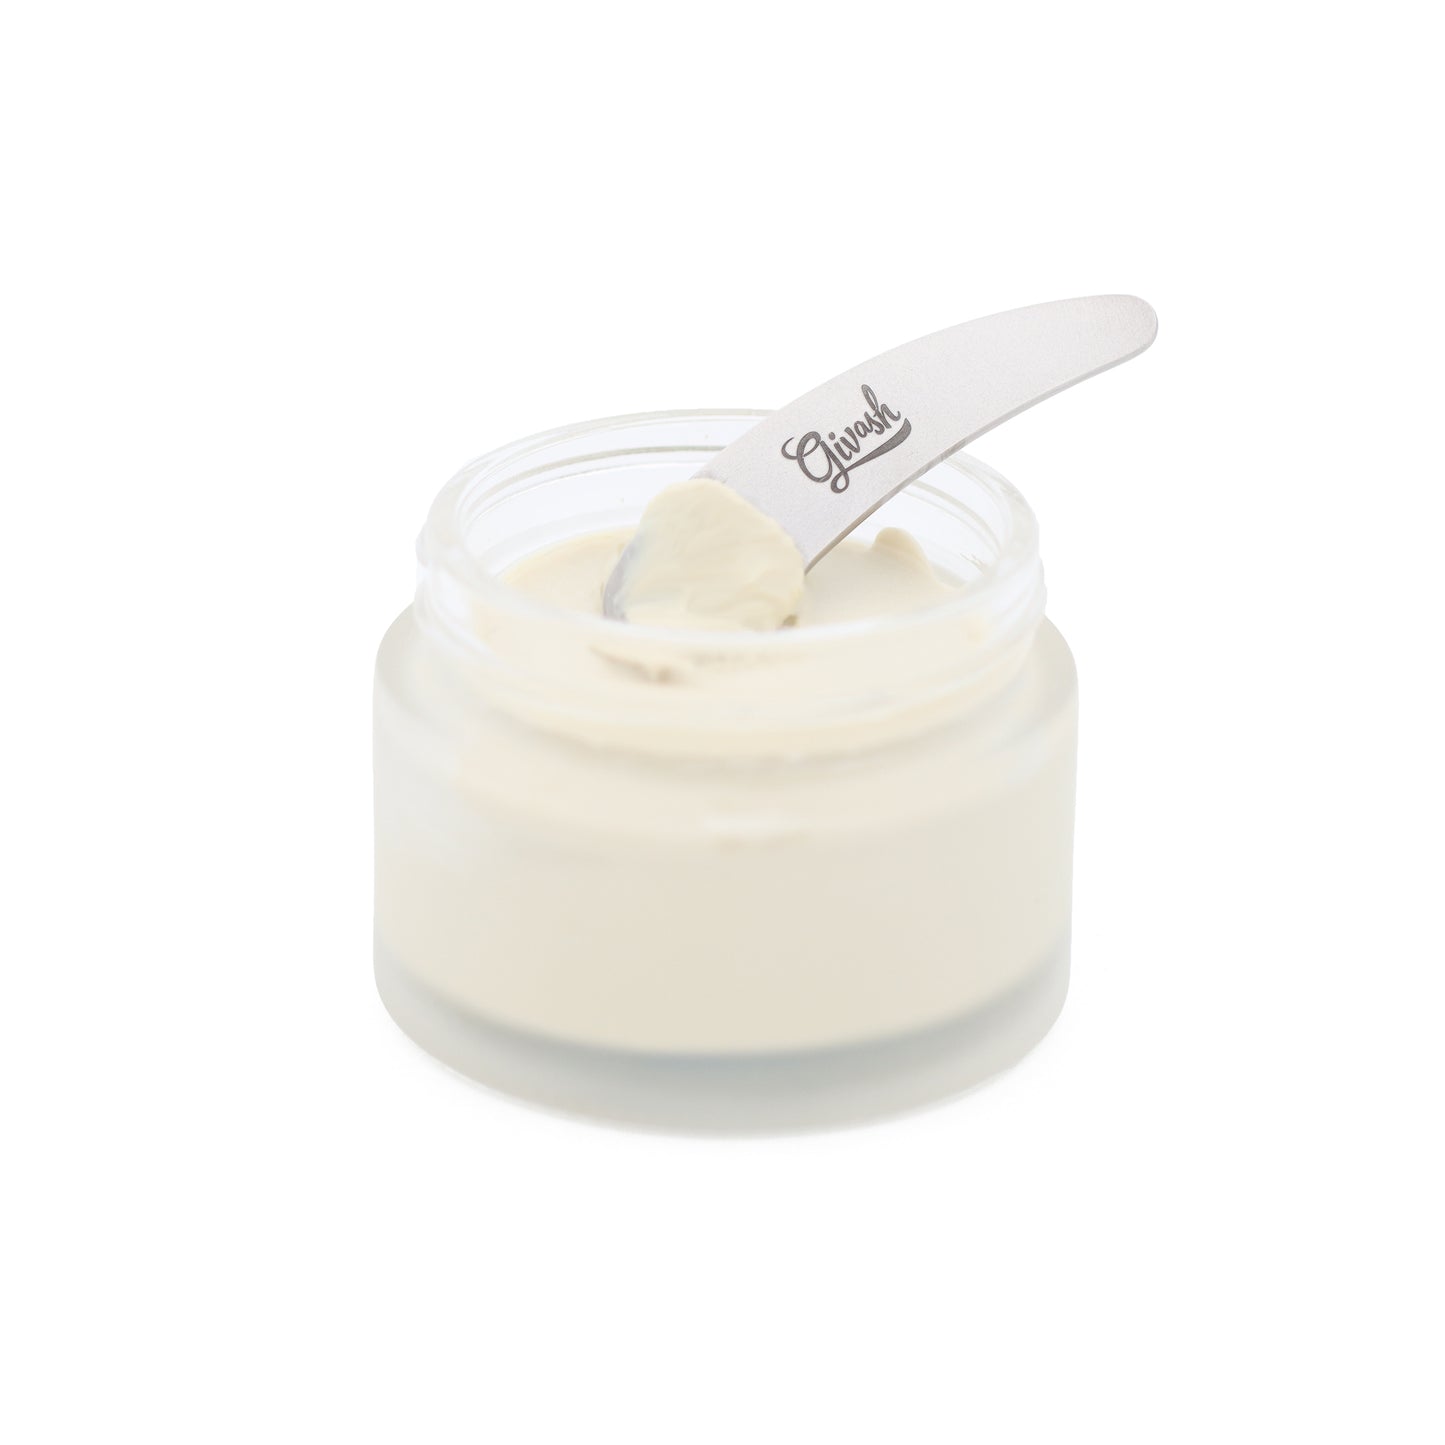 Givash stainless steel spatula scoop shown in an open deodorant jar with deodorant cream on it. Shot on a white background.